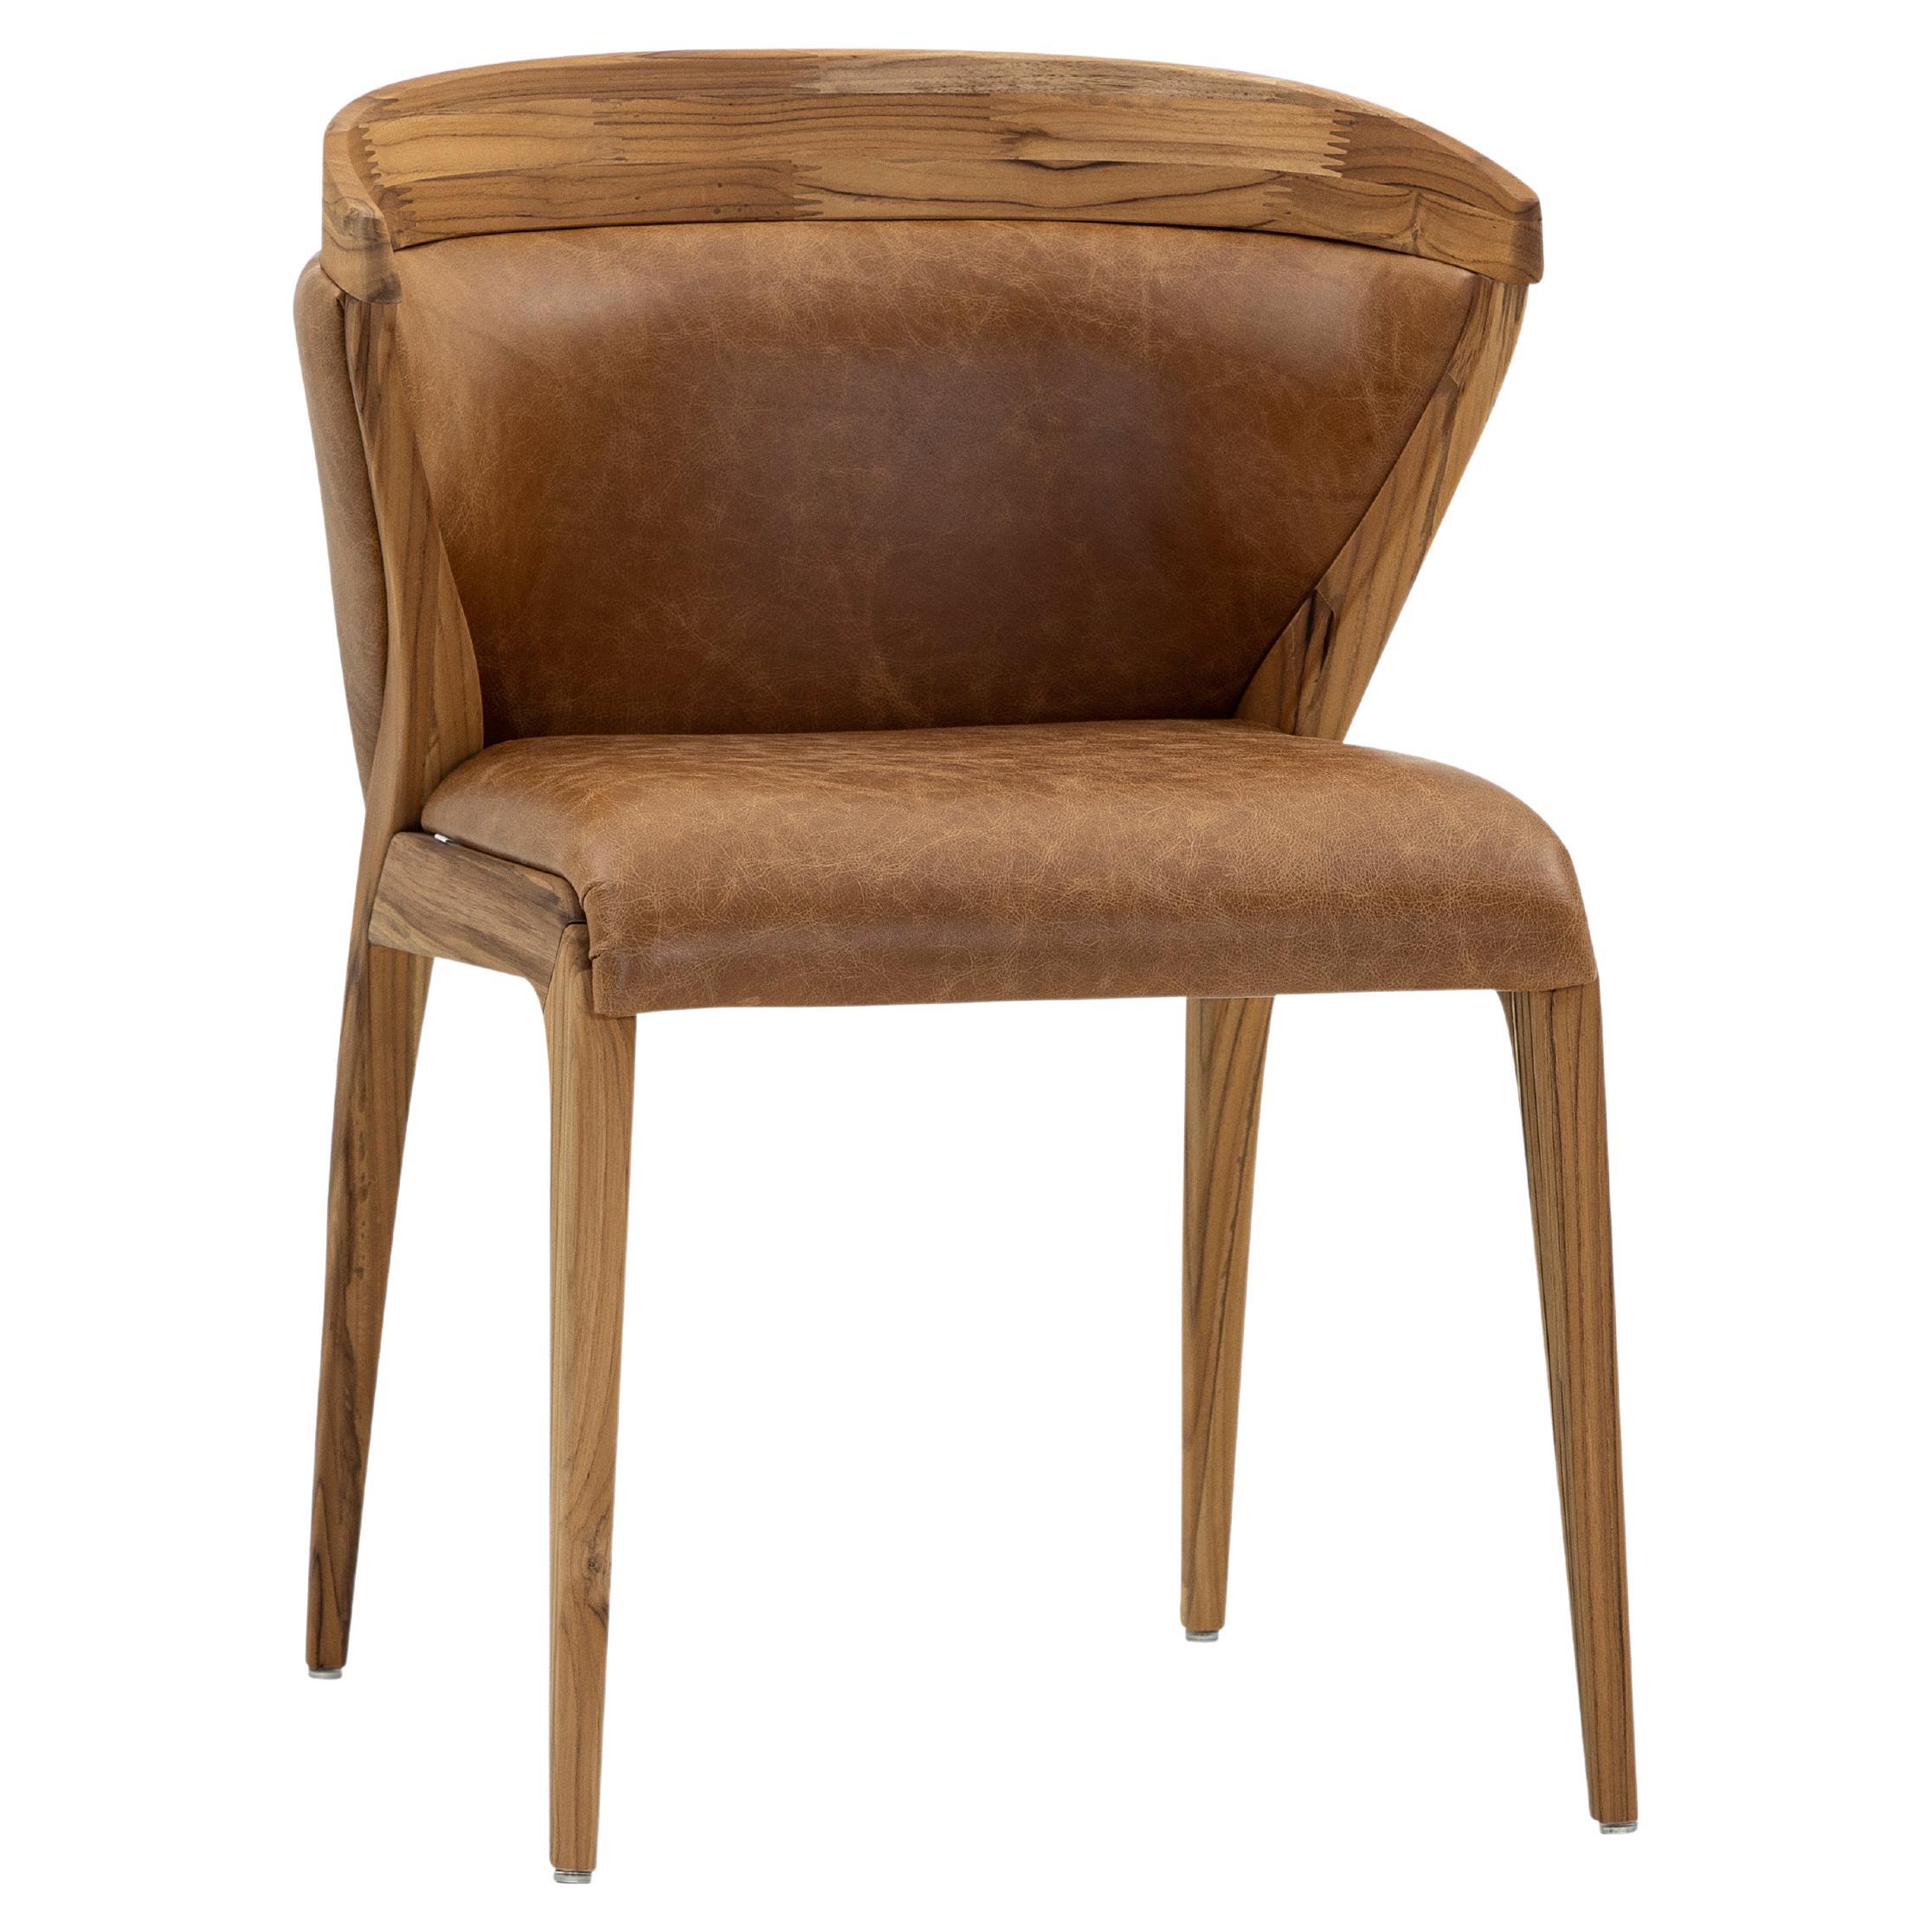 Mat Dining Chair in Teak Wood Finish, Upholstered Back and Brown Leather Seat For Sale